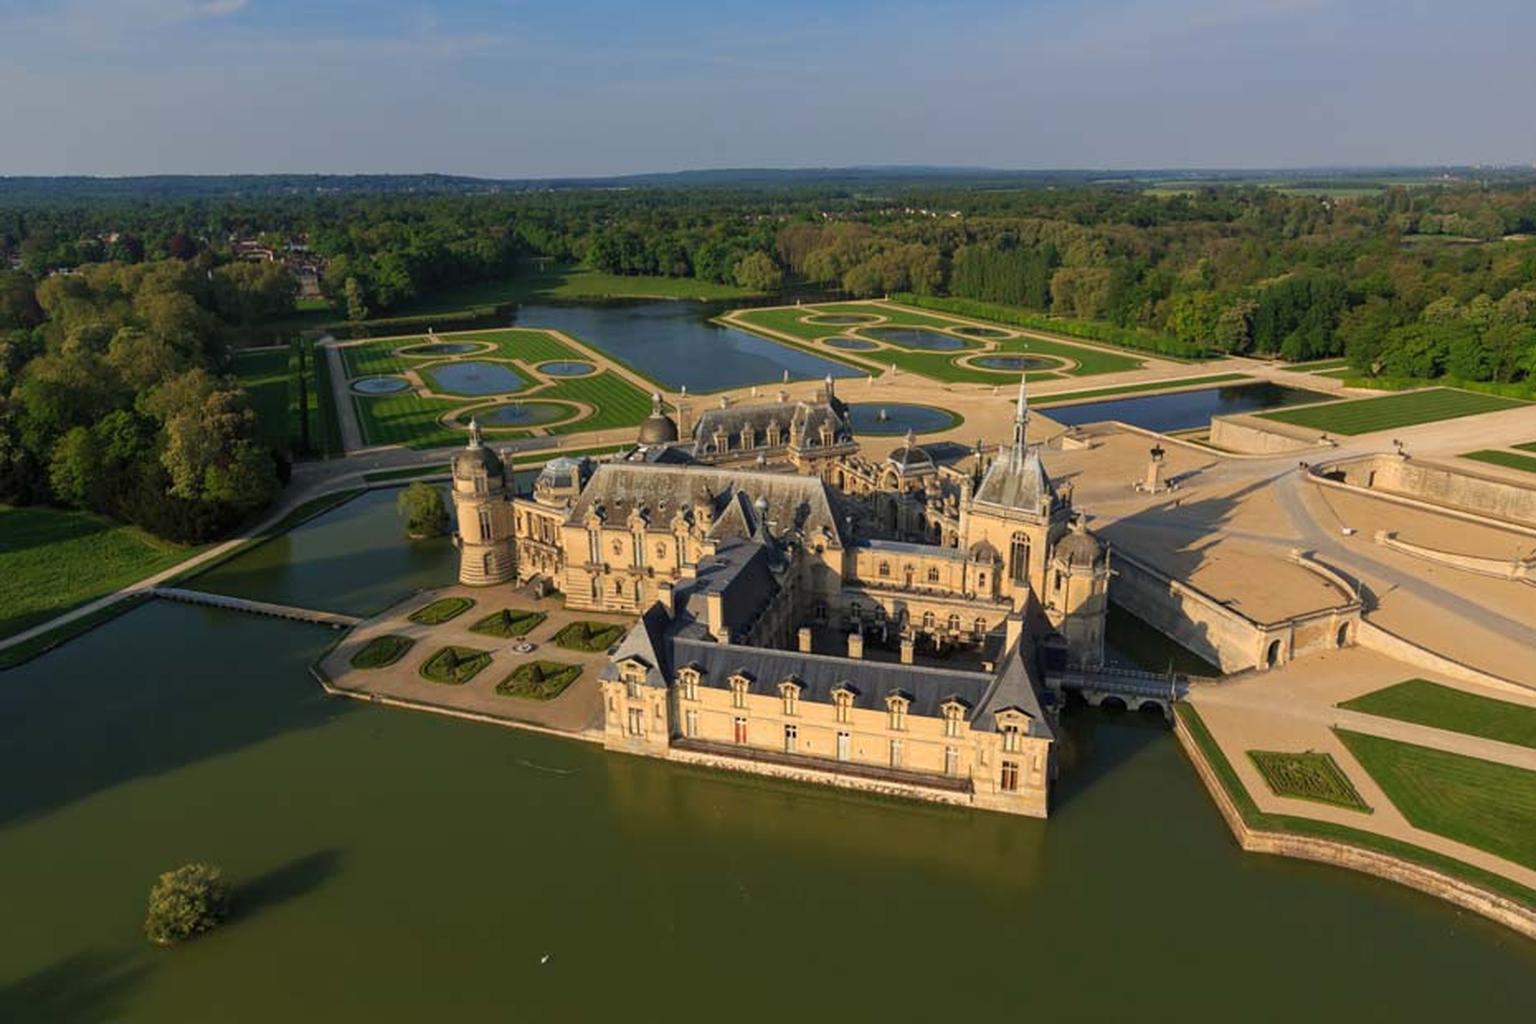 The two-day event Chantilly Art & Elegance celebrated French ‘art de vivre’ in the glorious grounds of Chantilly. Image by: Jerome Huyvet.